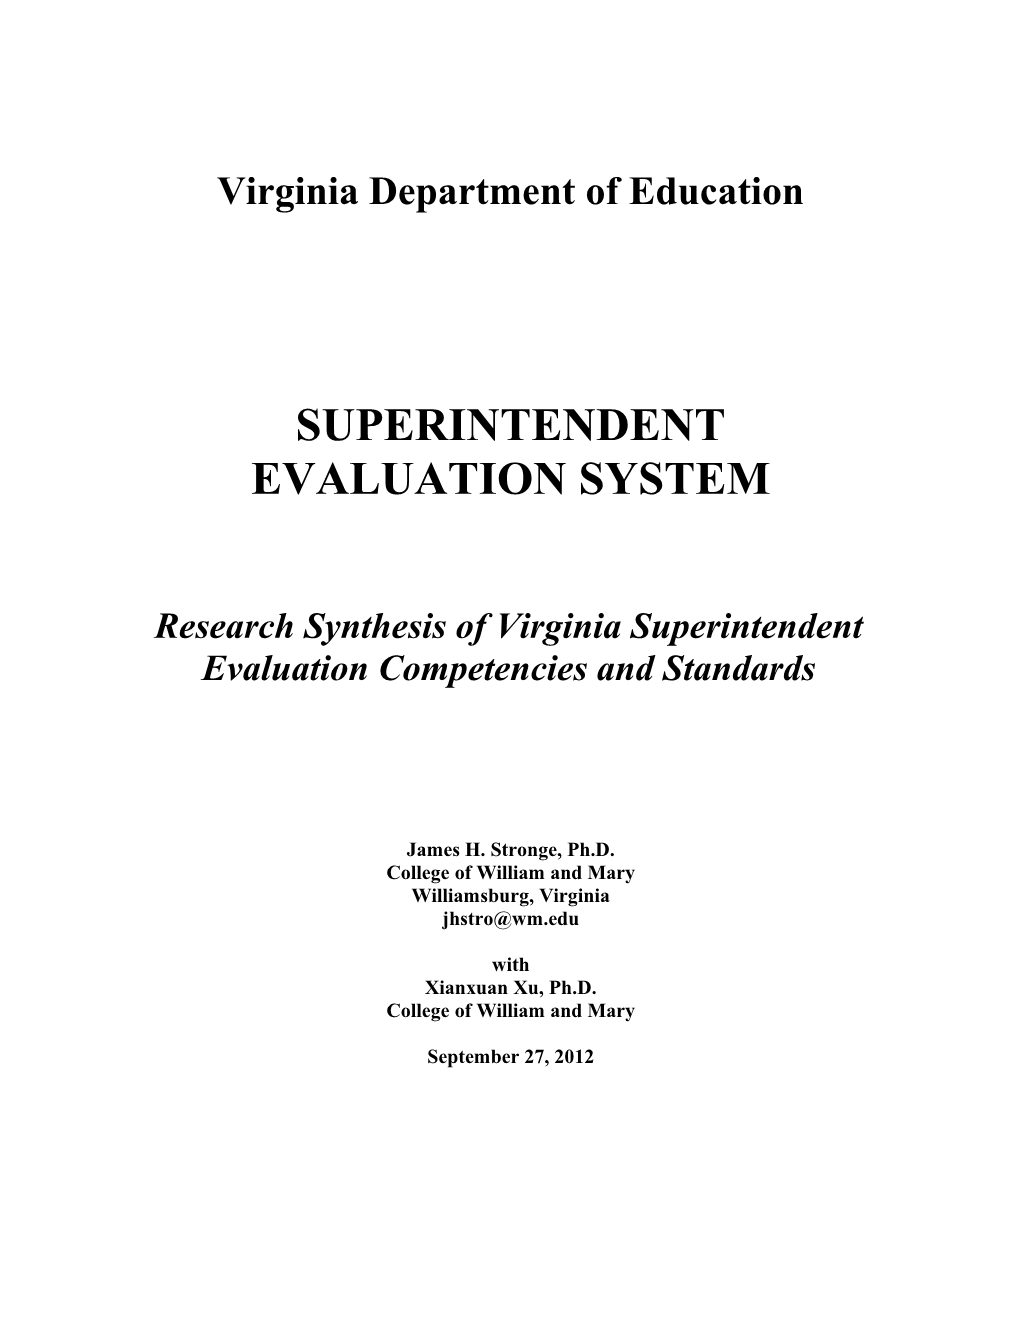 Research Synthesis of Virginia Superintendent Evaluation Competencies and Standards